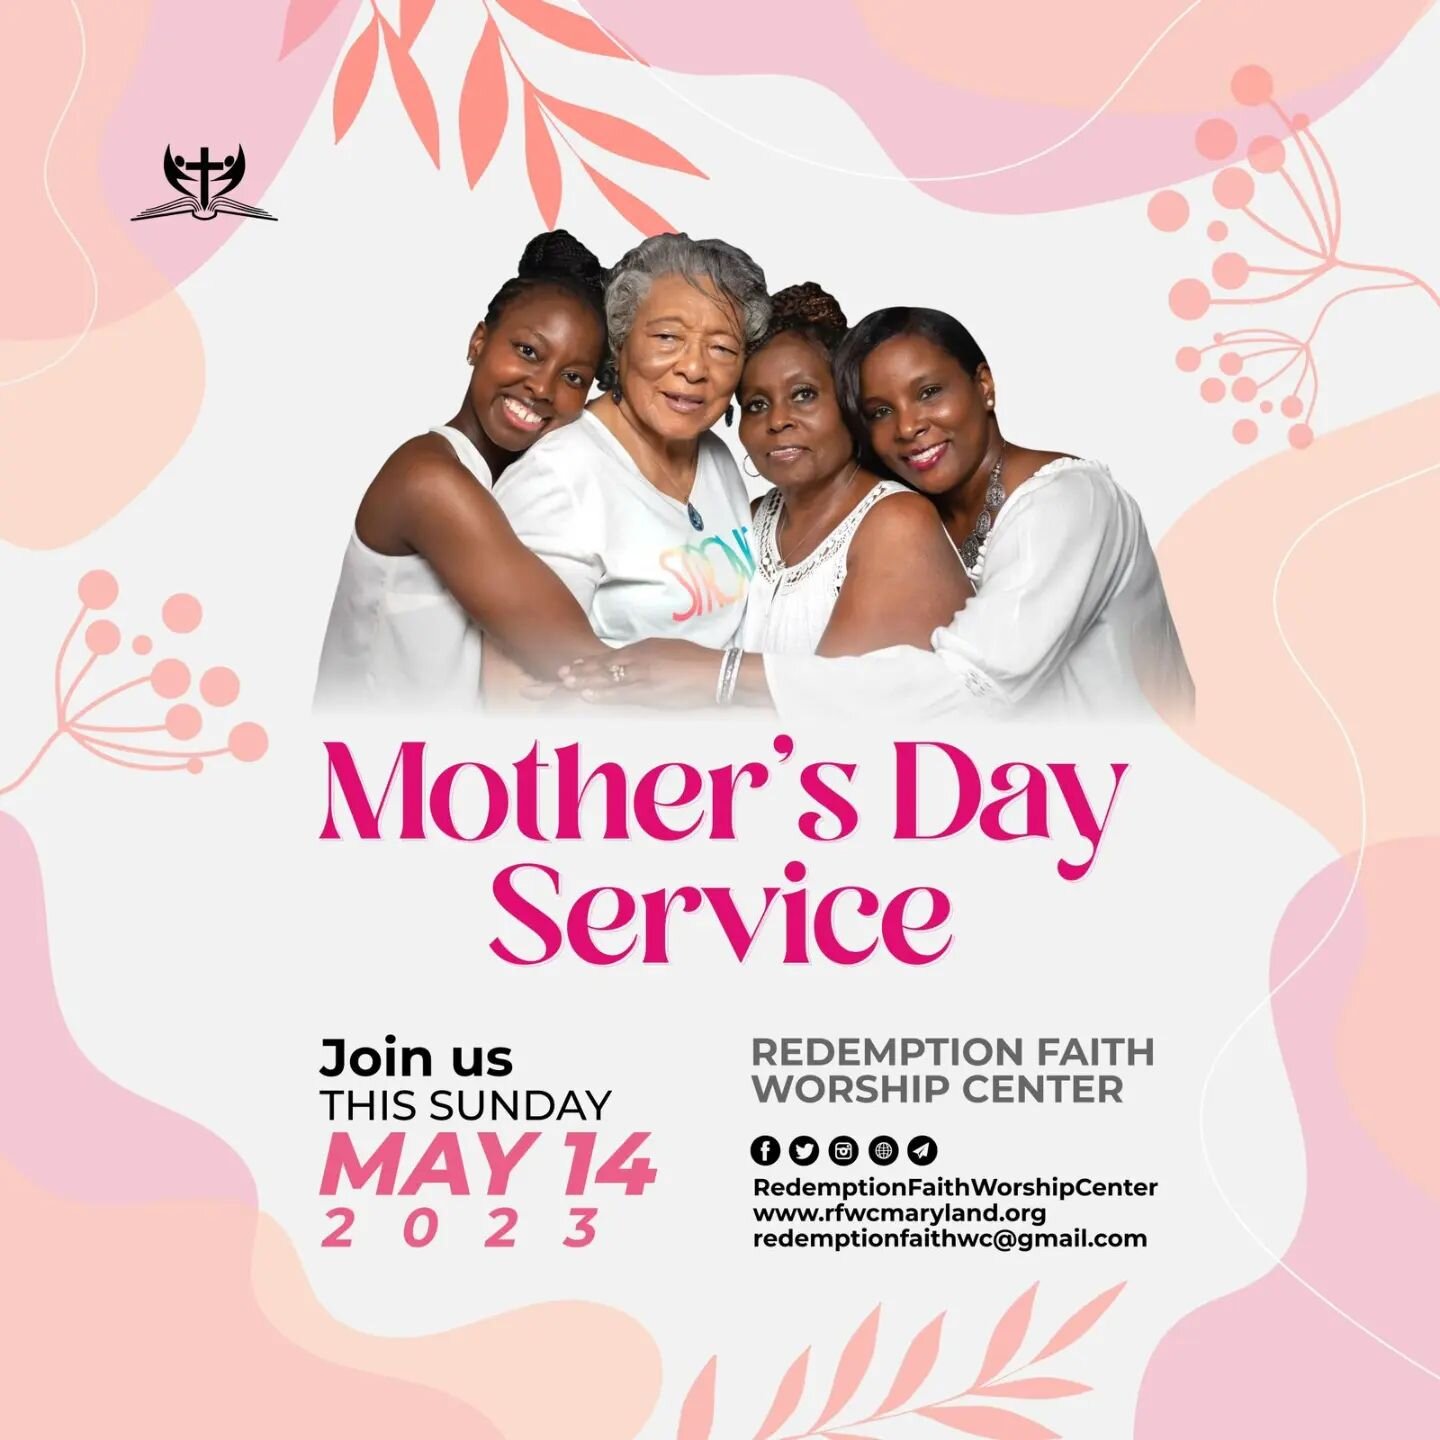 Life begun with the emotions and the love we show our mothers.&quot; Join us for our Mother's Day Service/Celebration. 
_______________
#RFWCService #SundayBest #SundayBlessings #MothersDay #MothersDayCelebration #CelebratingMothers